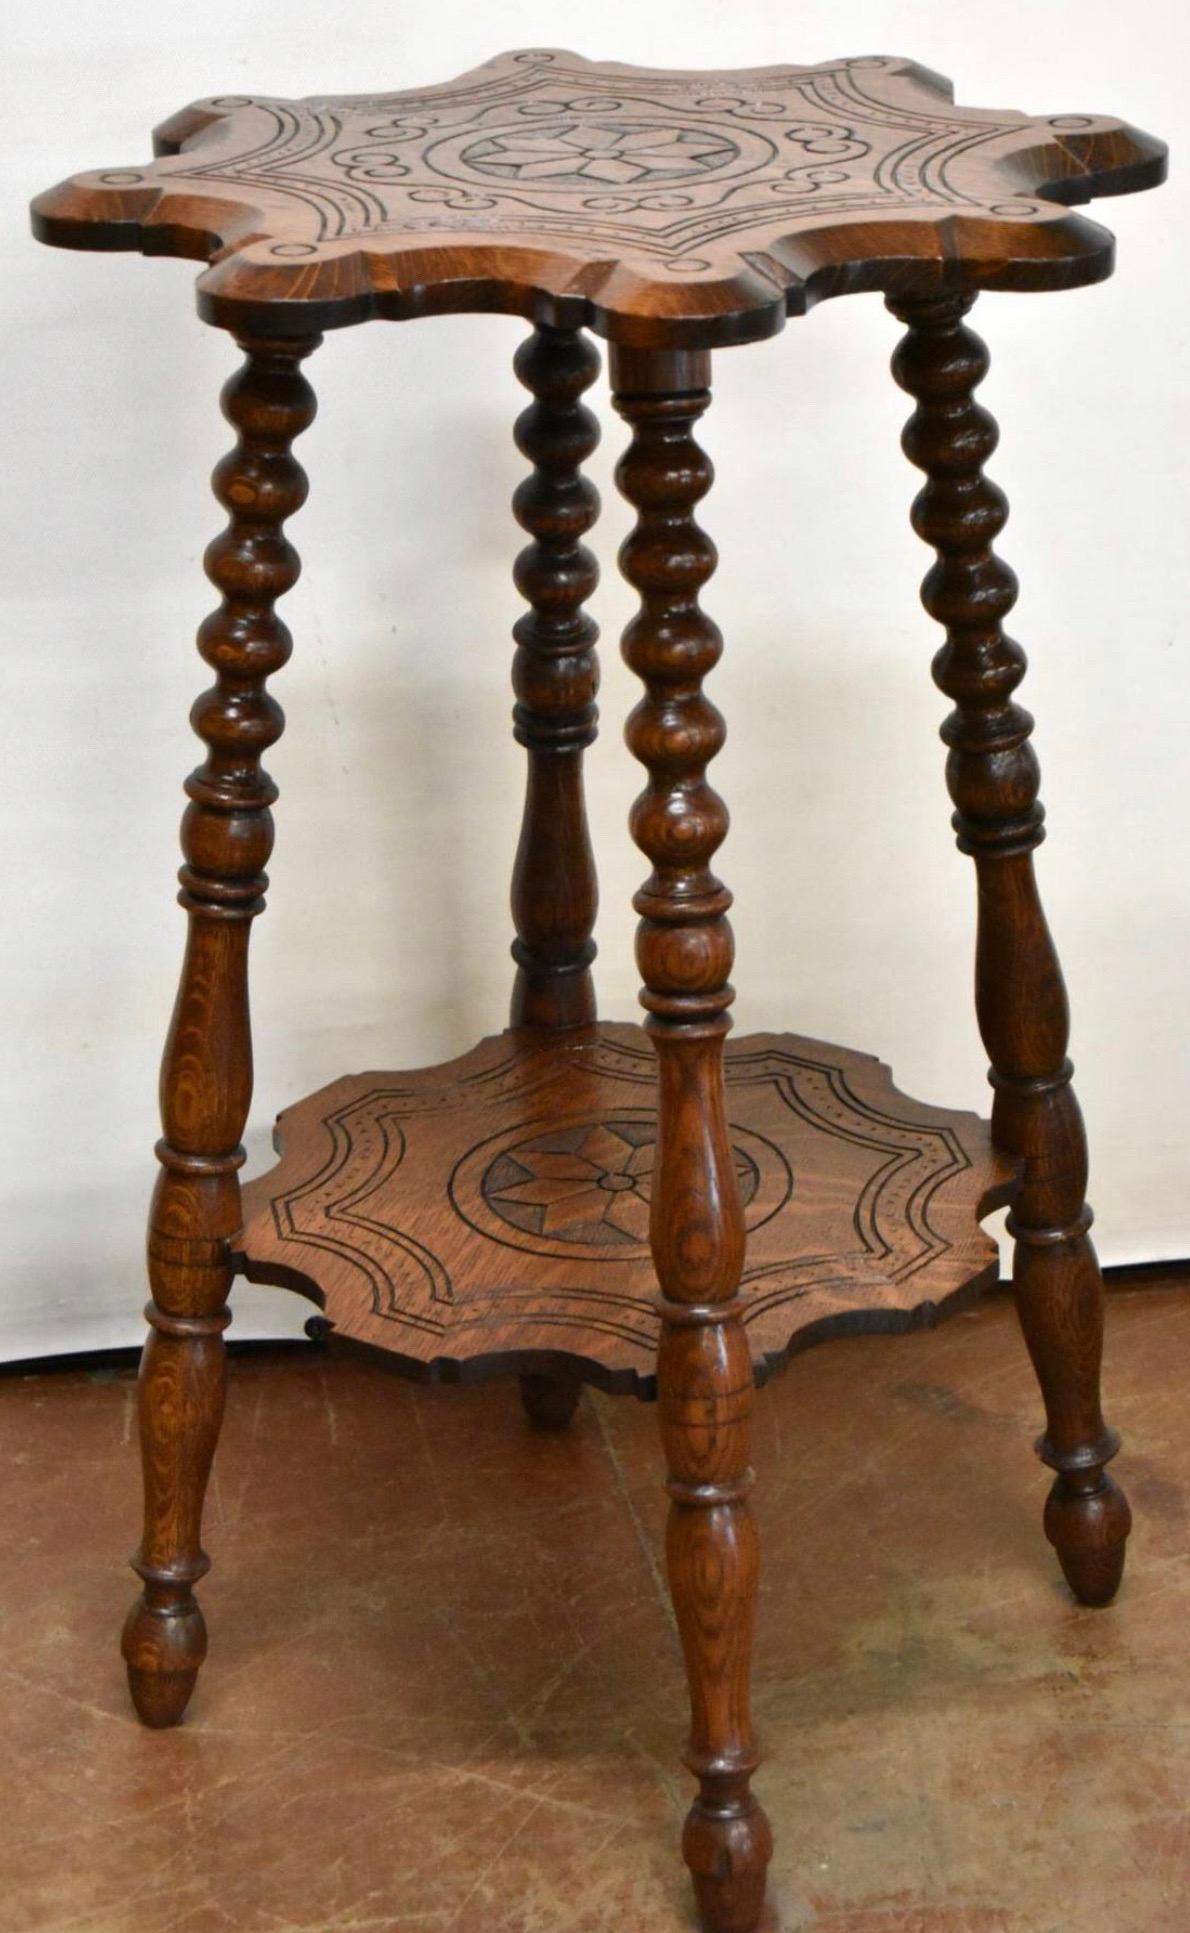 Antique oak parlor table features hand carved top resembling a western star or badge and second shelf
Measures 29 in Tall, 19 in Deep.